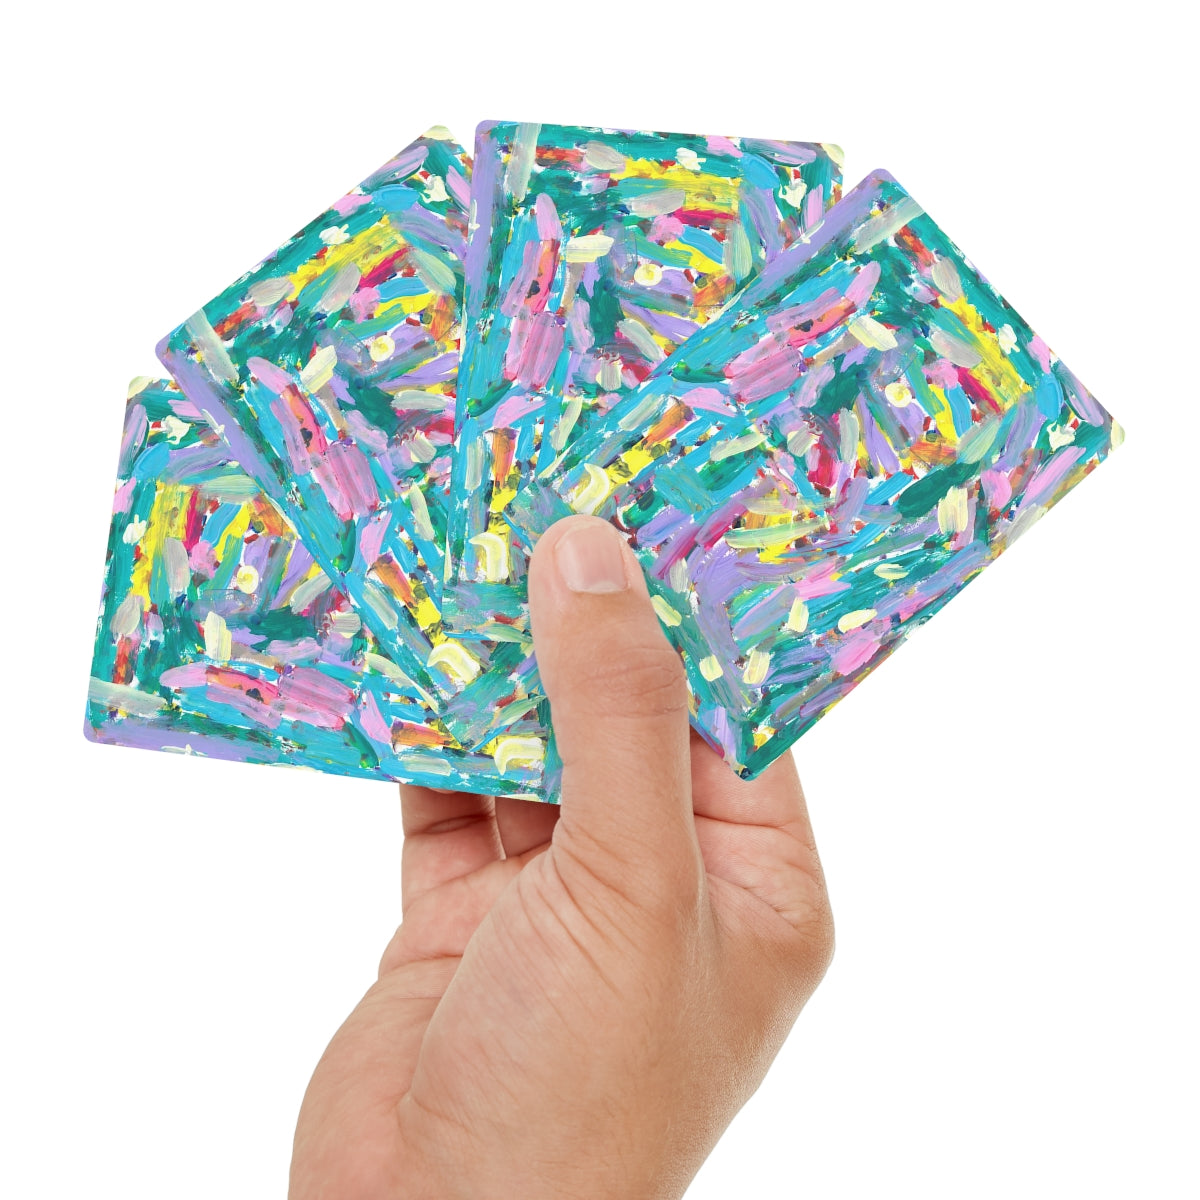 playing cards with Horizontal and vertical streaks cover the canvas in tones of turquoise, deep green, yellow, lavender, and pink.